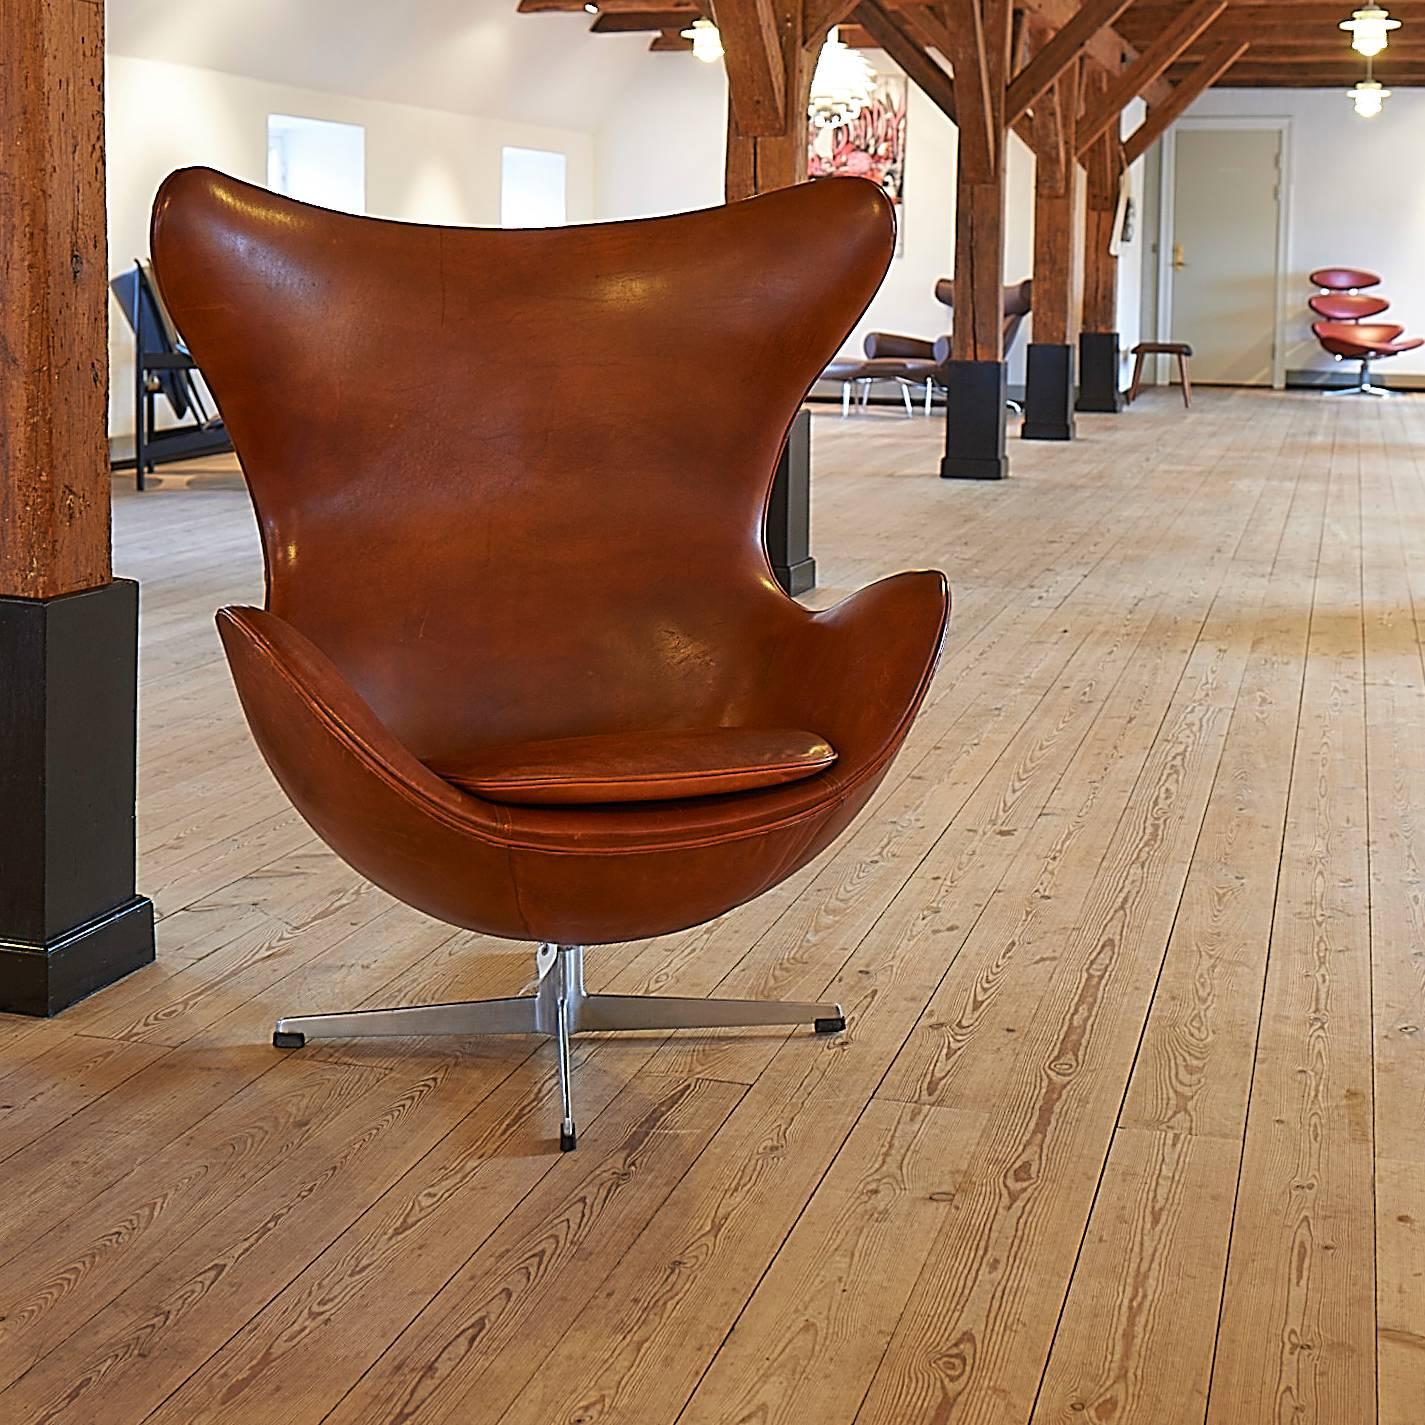 A very rare example of Arne Jacobsens Egg with matching ottoman in original from the 1960s.
The Egg chair is labelled 